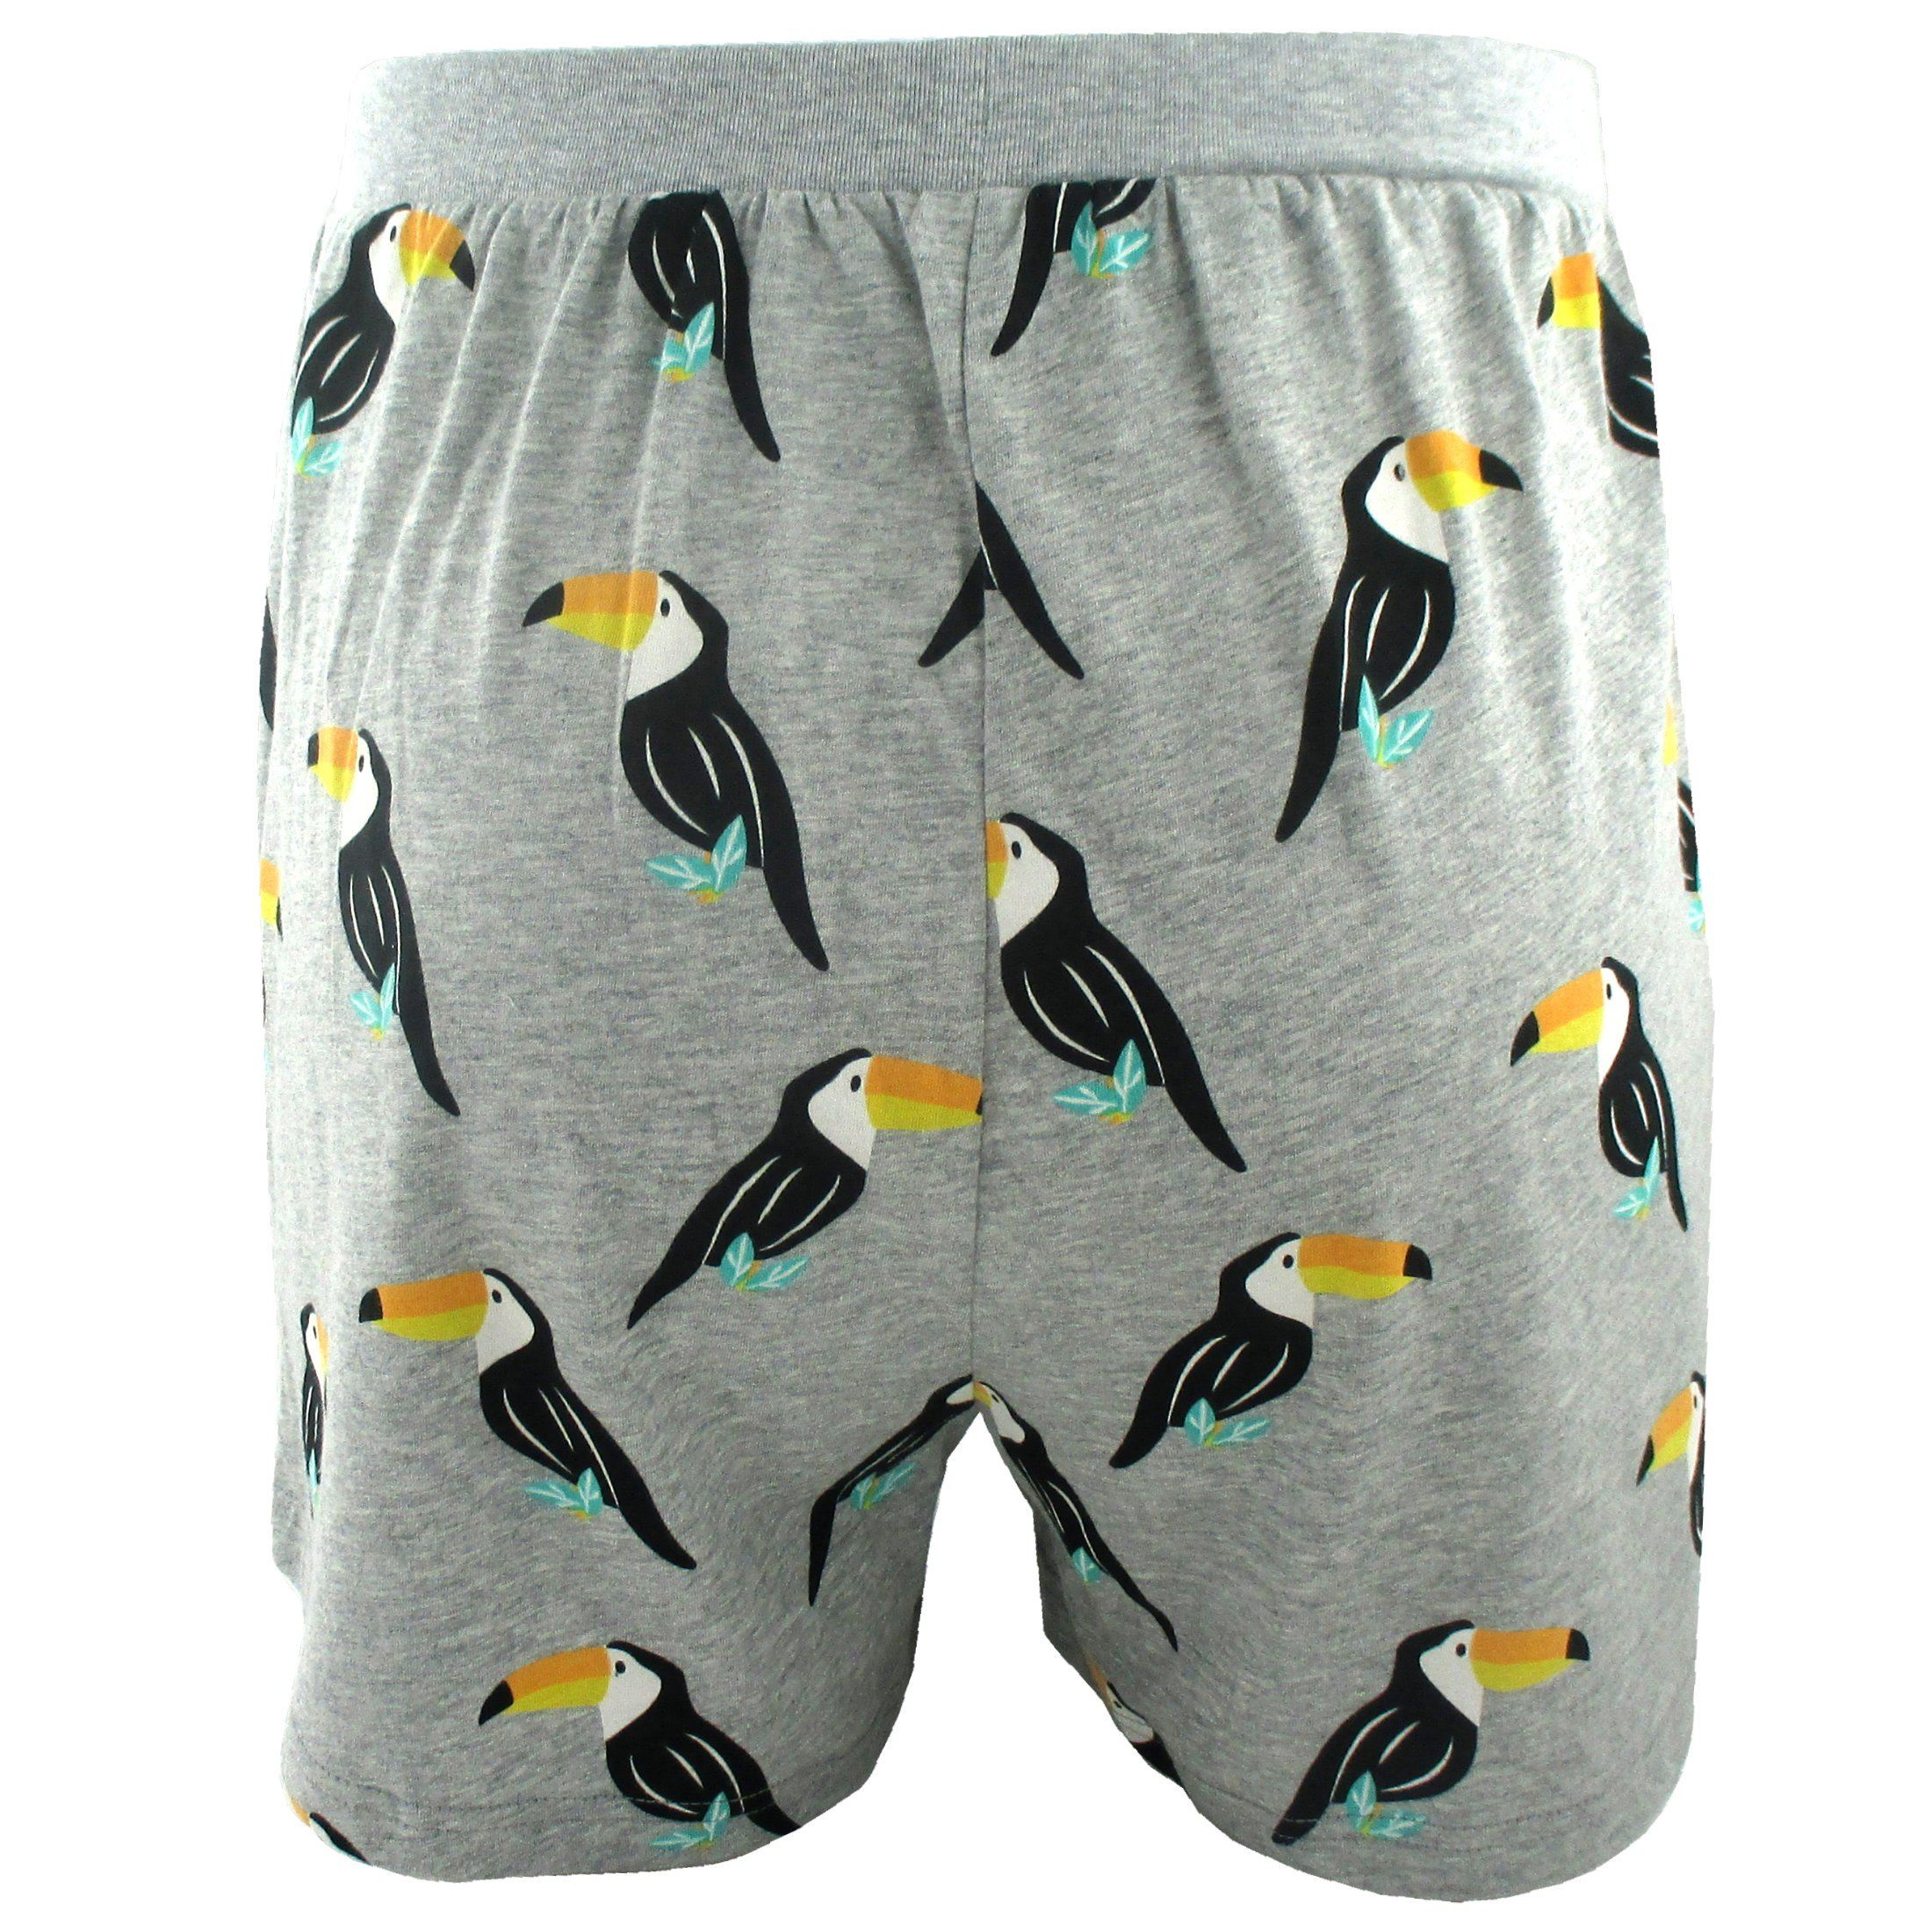 Super Soft and Comfy Cotton Jersey Stretch Knit Boxer Shorts Underwear For Men with Toucan Pattern